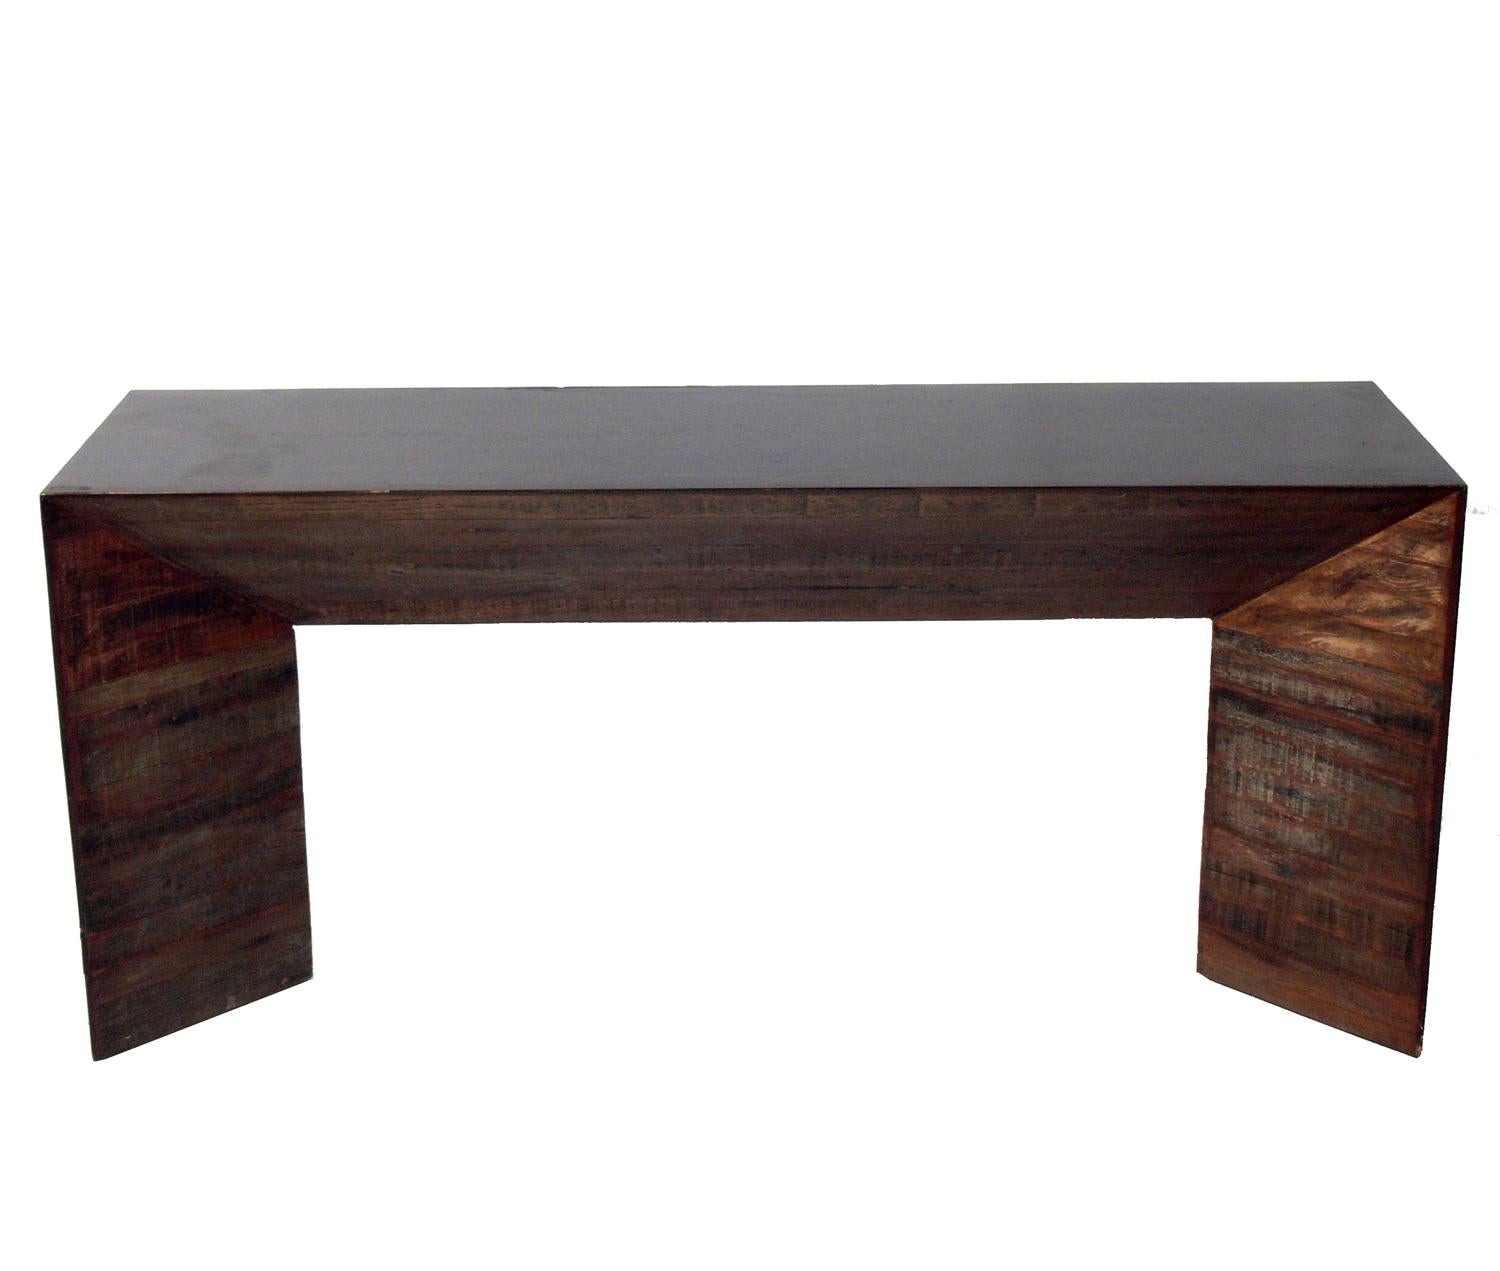 Rustic modern console table, American, 20th century. This piece is a versatile size and can be used as a console or sofa table, desk, bar, or media center for your TV. It is constructed of stacked rustic wood with a sleek top and sides.